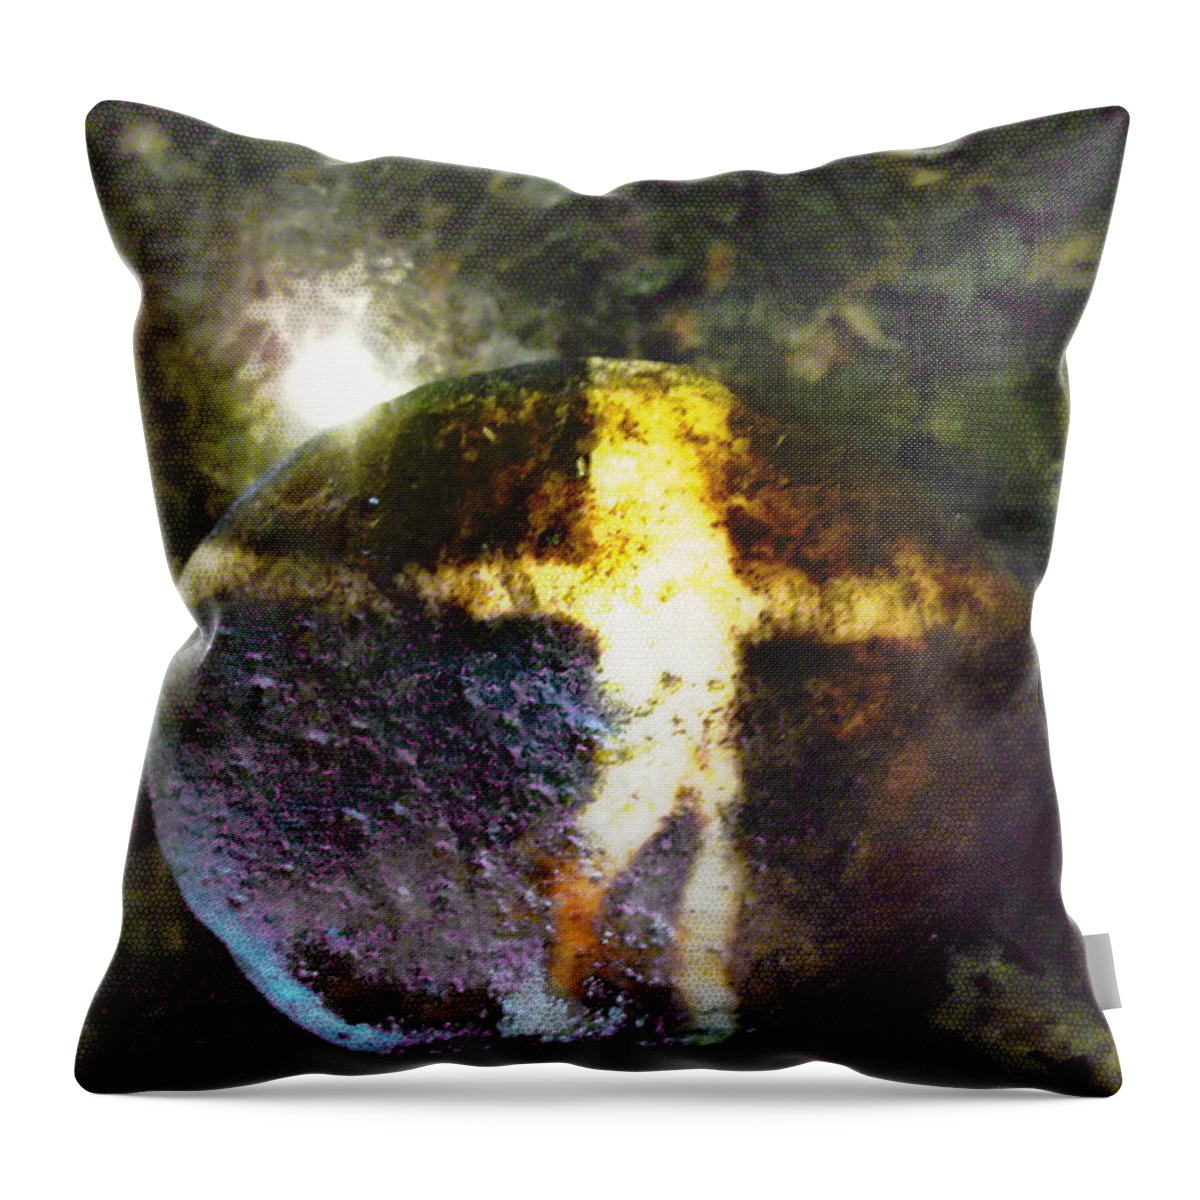 Ancient. Wisdom Throw Pillow featuring the photograph 5 Pointed Star by Susan Esbensen